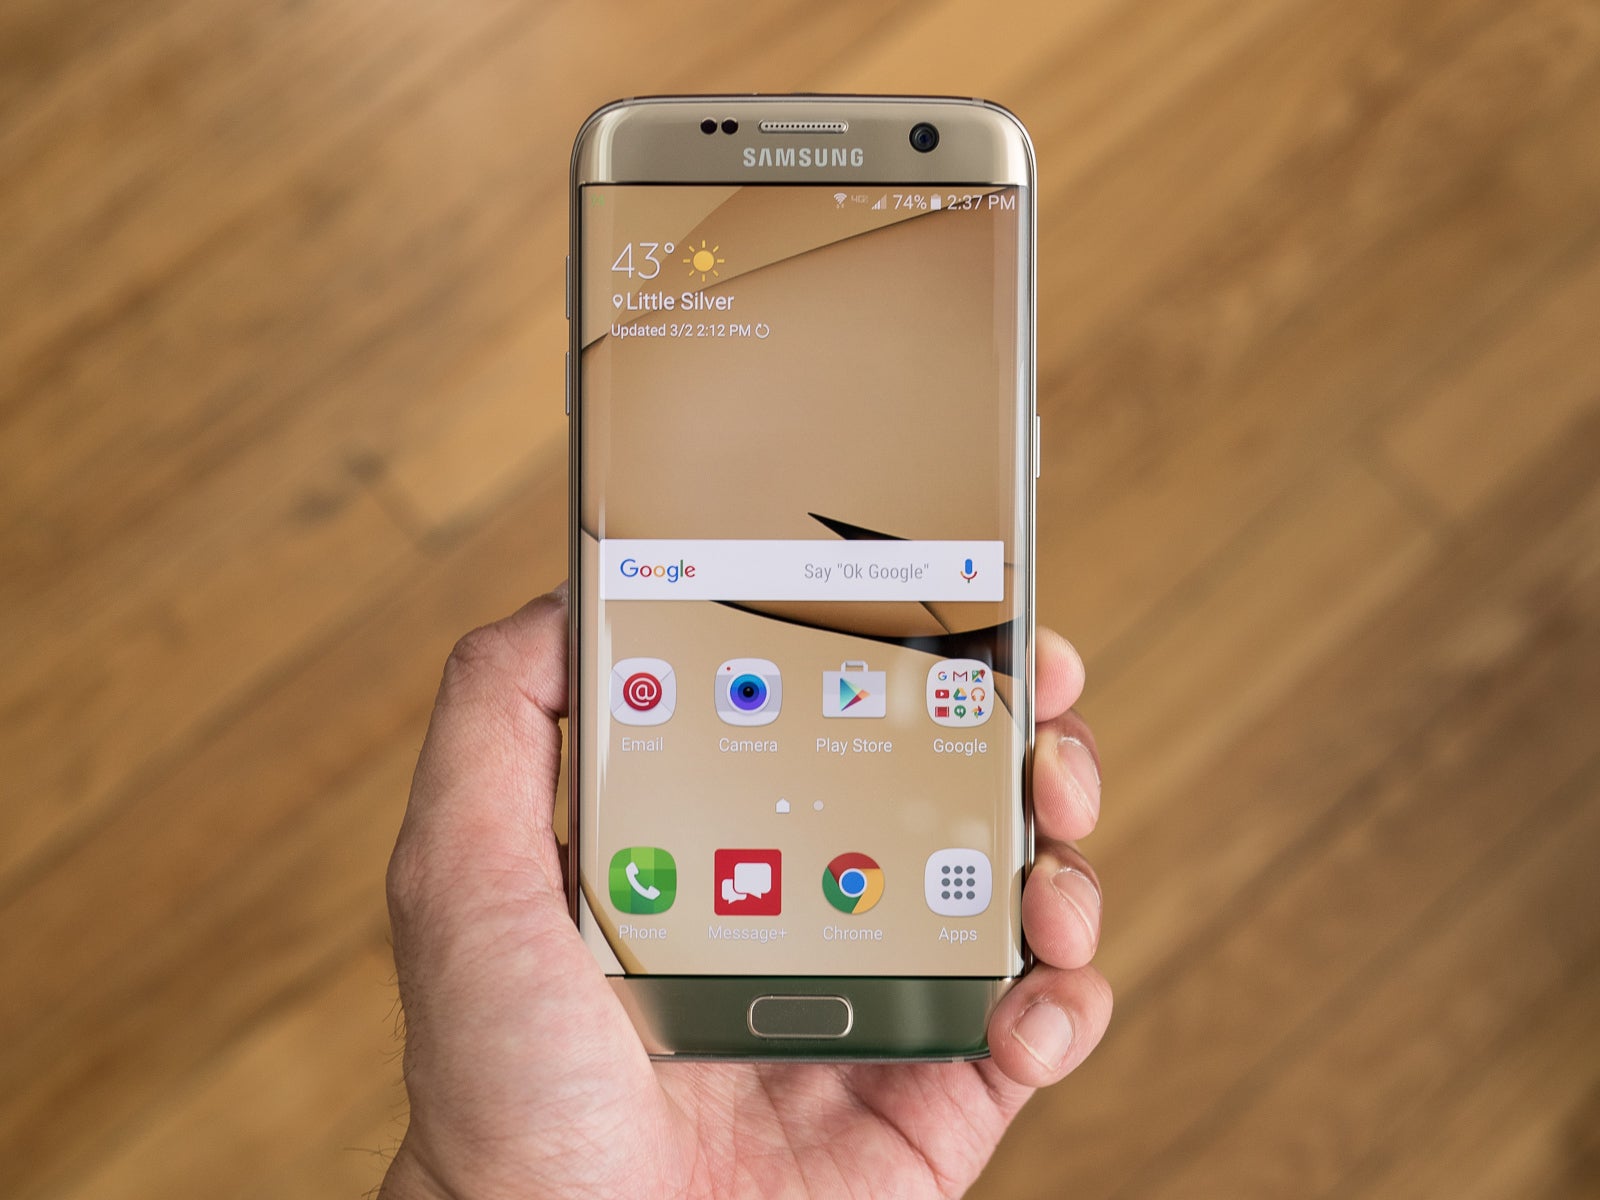 Samsung Galaxy S7 Edge: Revisiting the legend 5 years after its launch